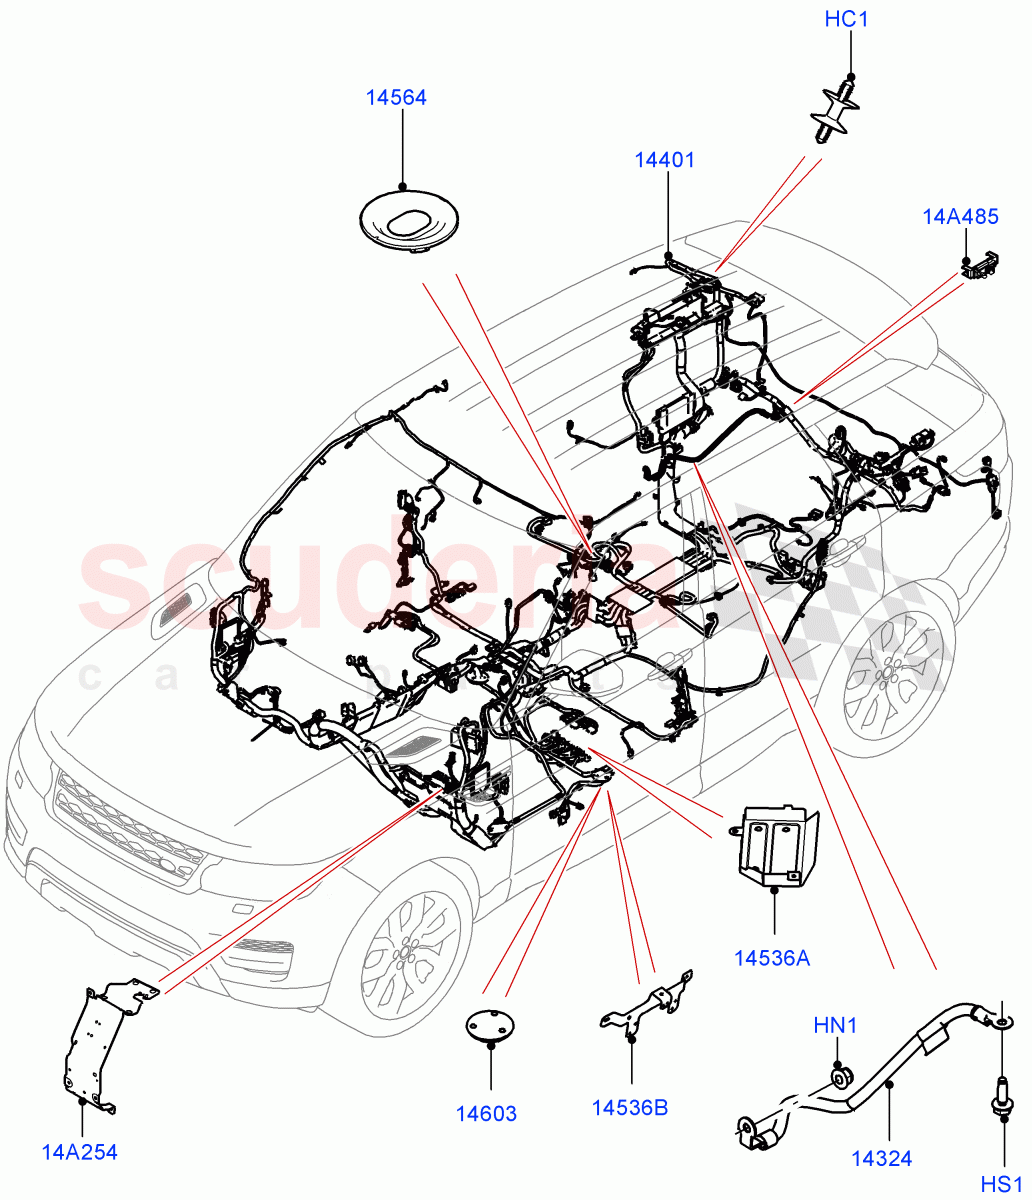 Electrical Wiring - Engine And Dash(Main Harness)((V)FROMFA000001,(V)TOFA999999) of Land Rover Land Rover Range Rover Sport (2014+) [2.0 Turbo Diesel]